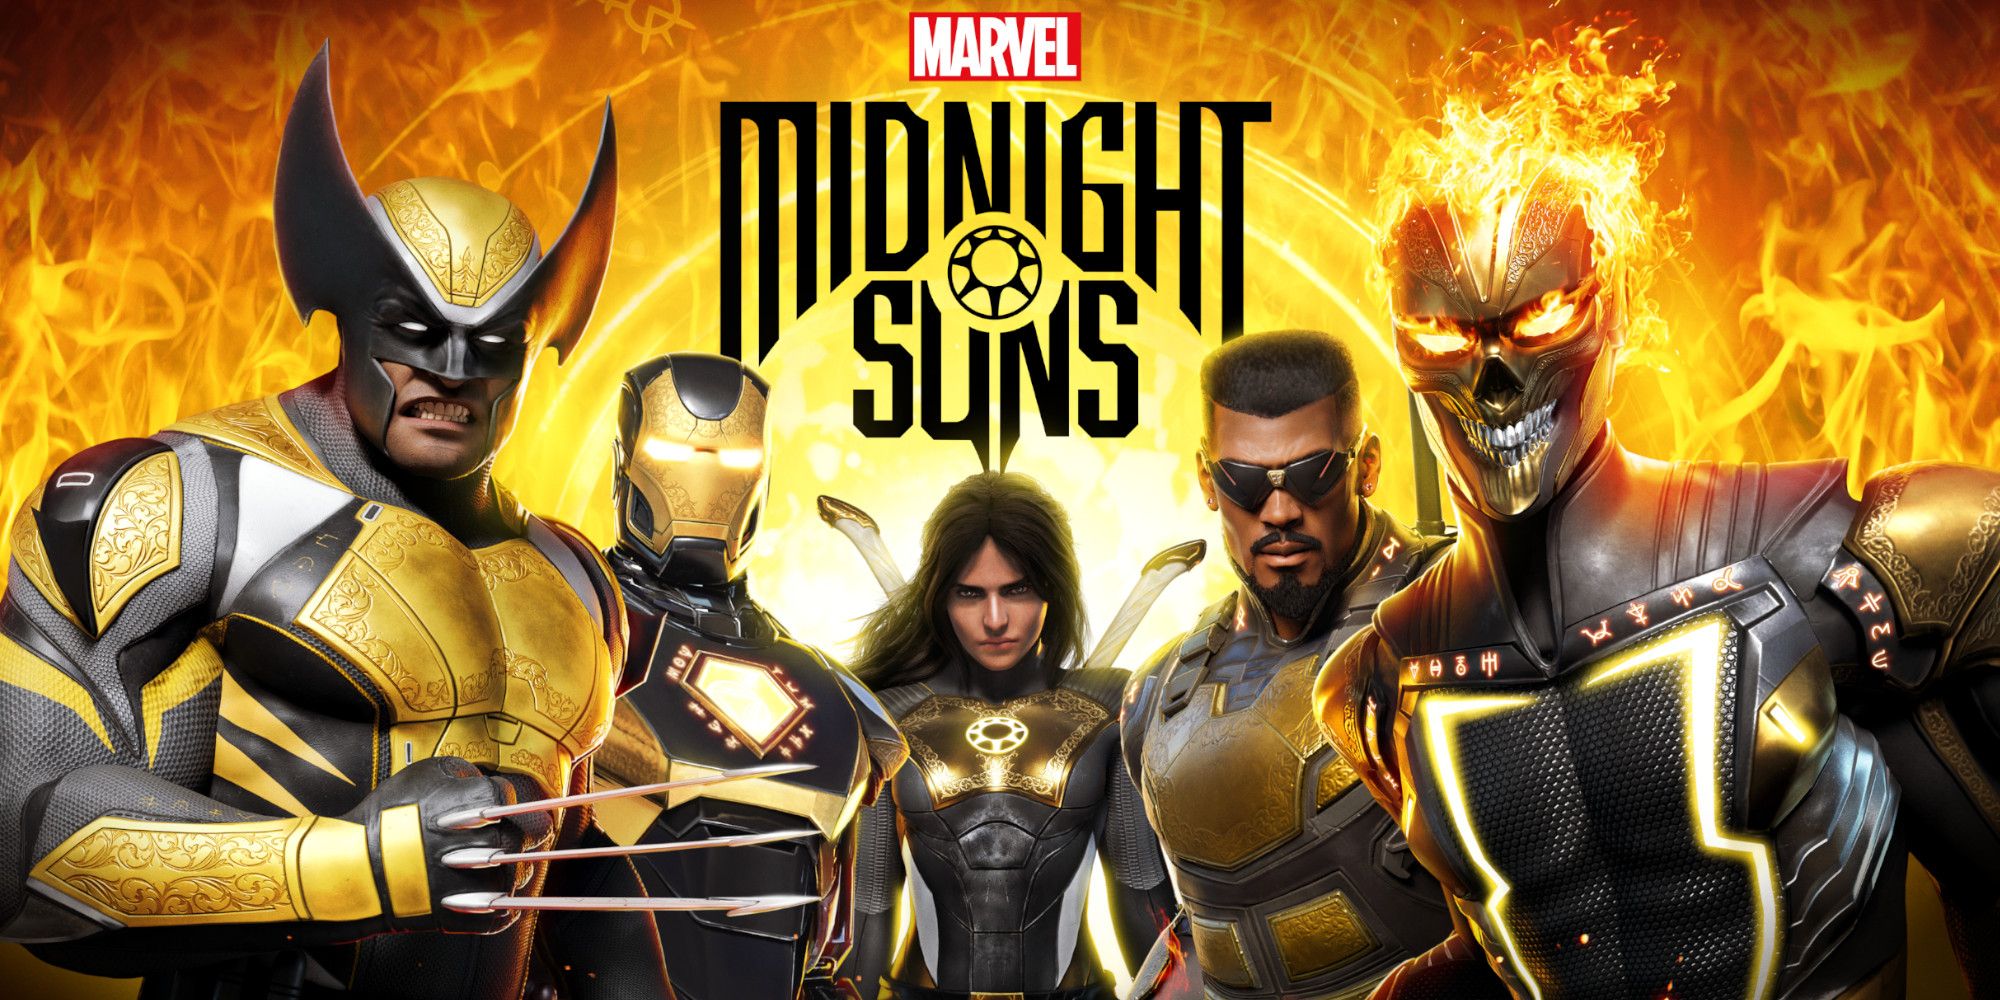 Every Marvel Character In Midnight Suns Confirmed